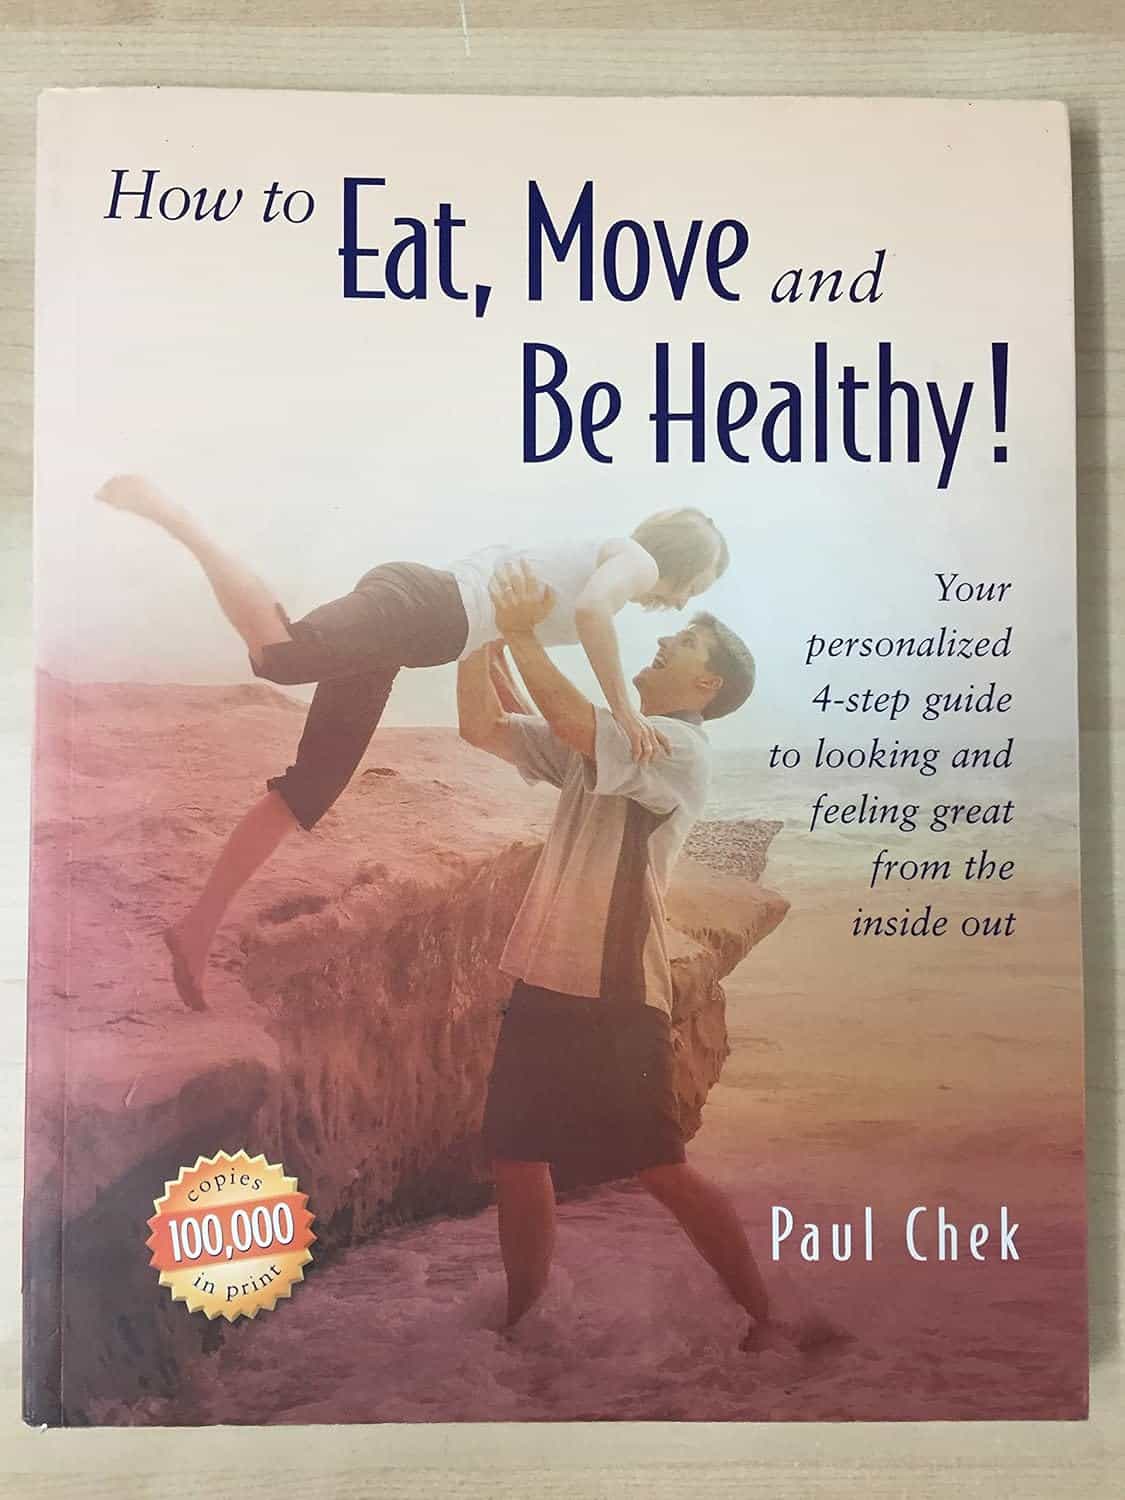 How to Eat, Move and Be Healthy! – Paul Chek